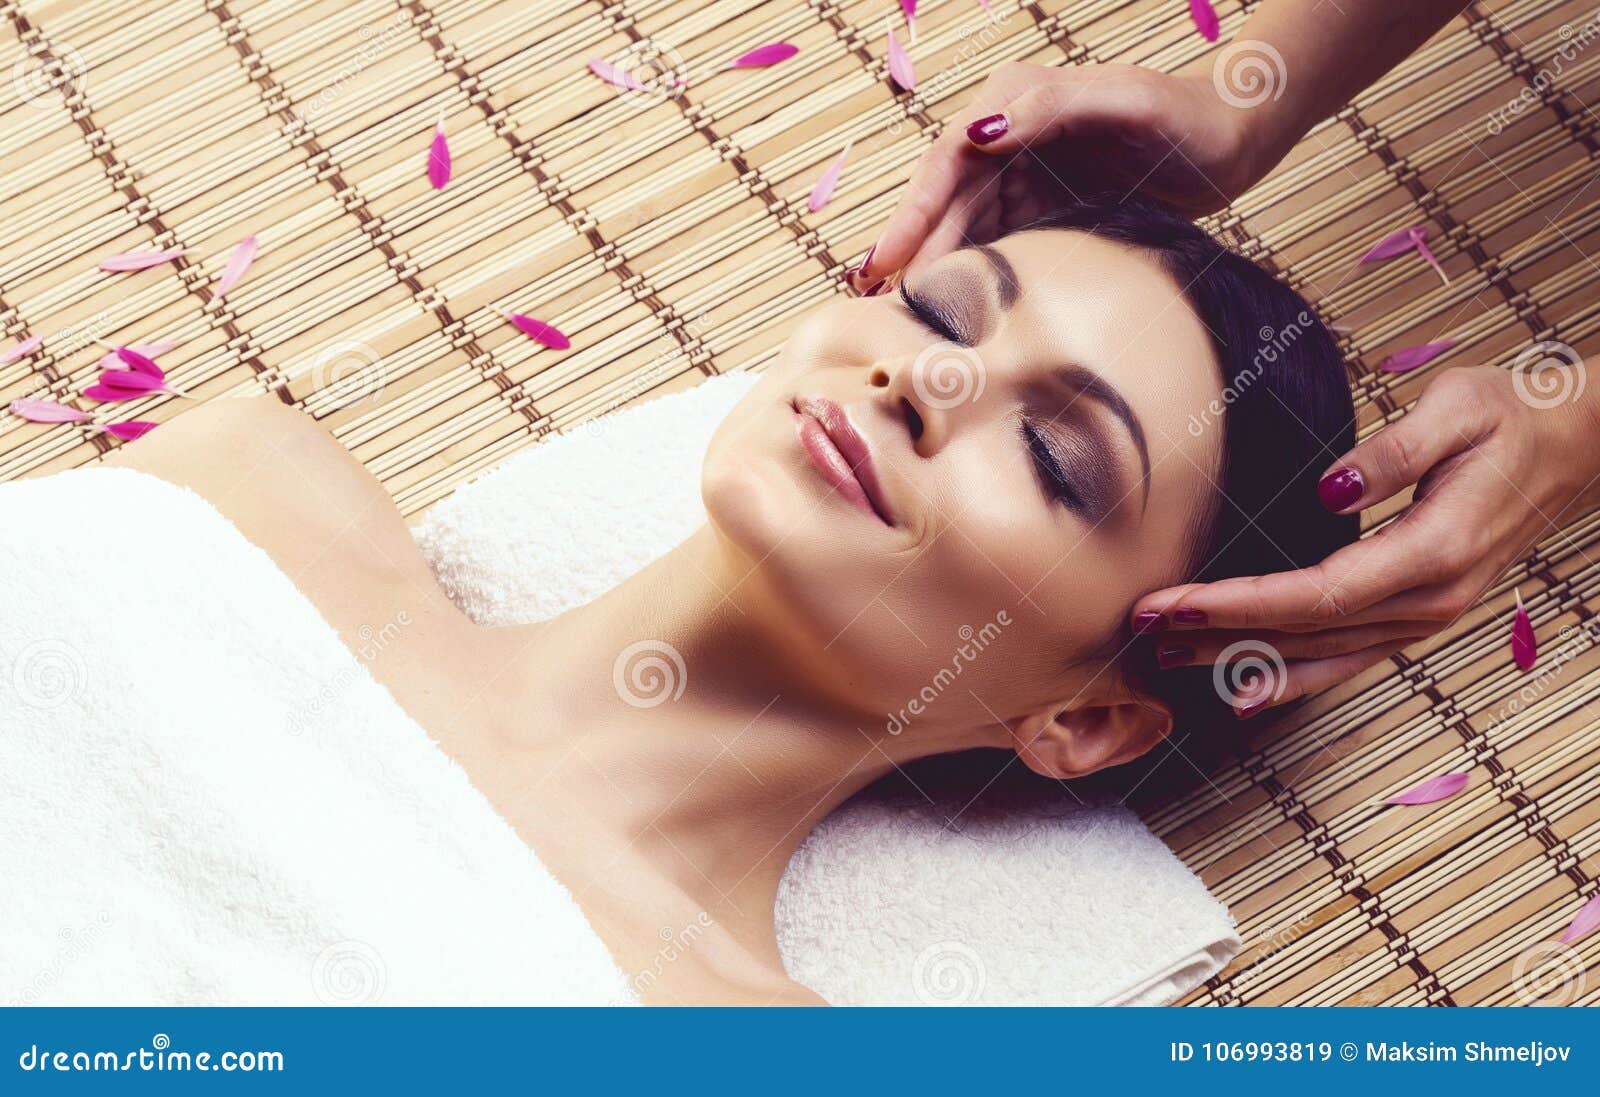 Healthy And Beautiful Woman Getting Massage Treatment In Spa Salon Stock Image Image Of